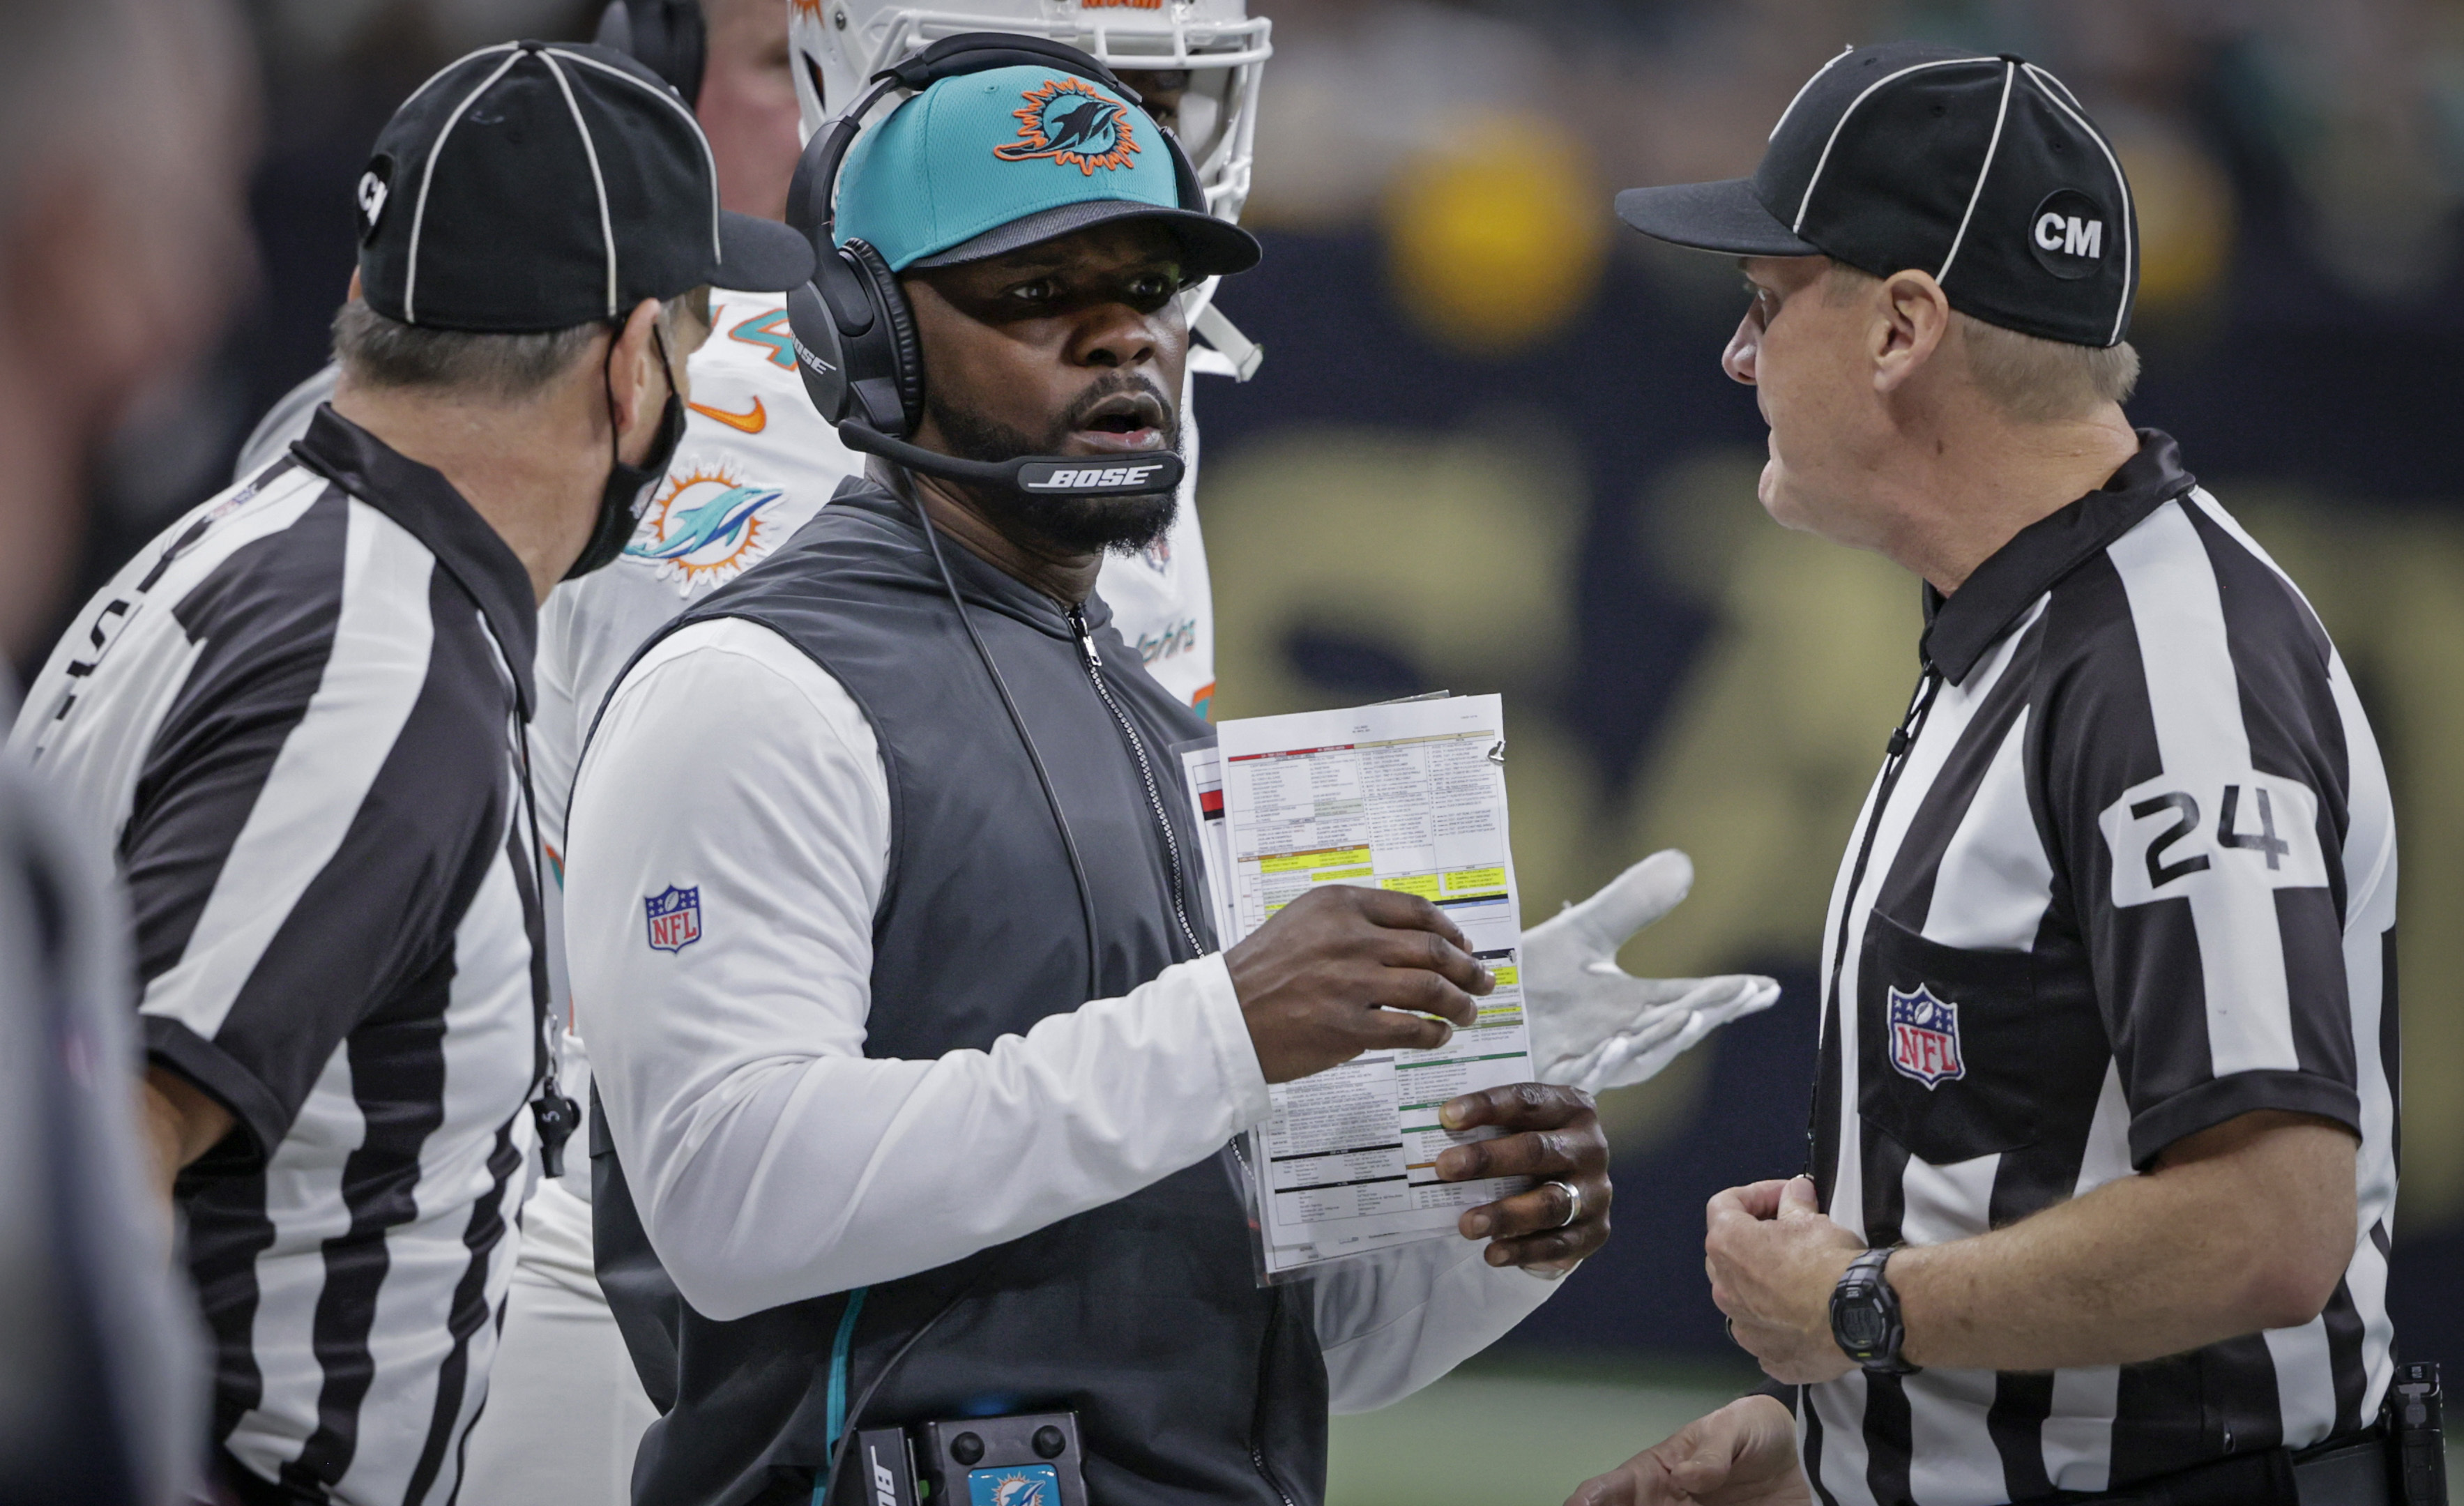 Fired Miami Dolphins coach sues NFL, alleging racist hiring - OPB